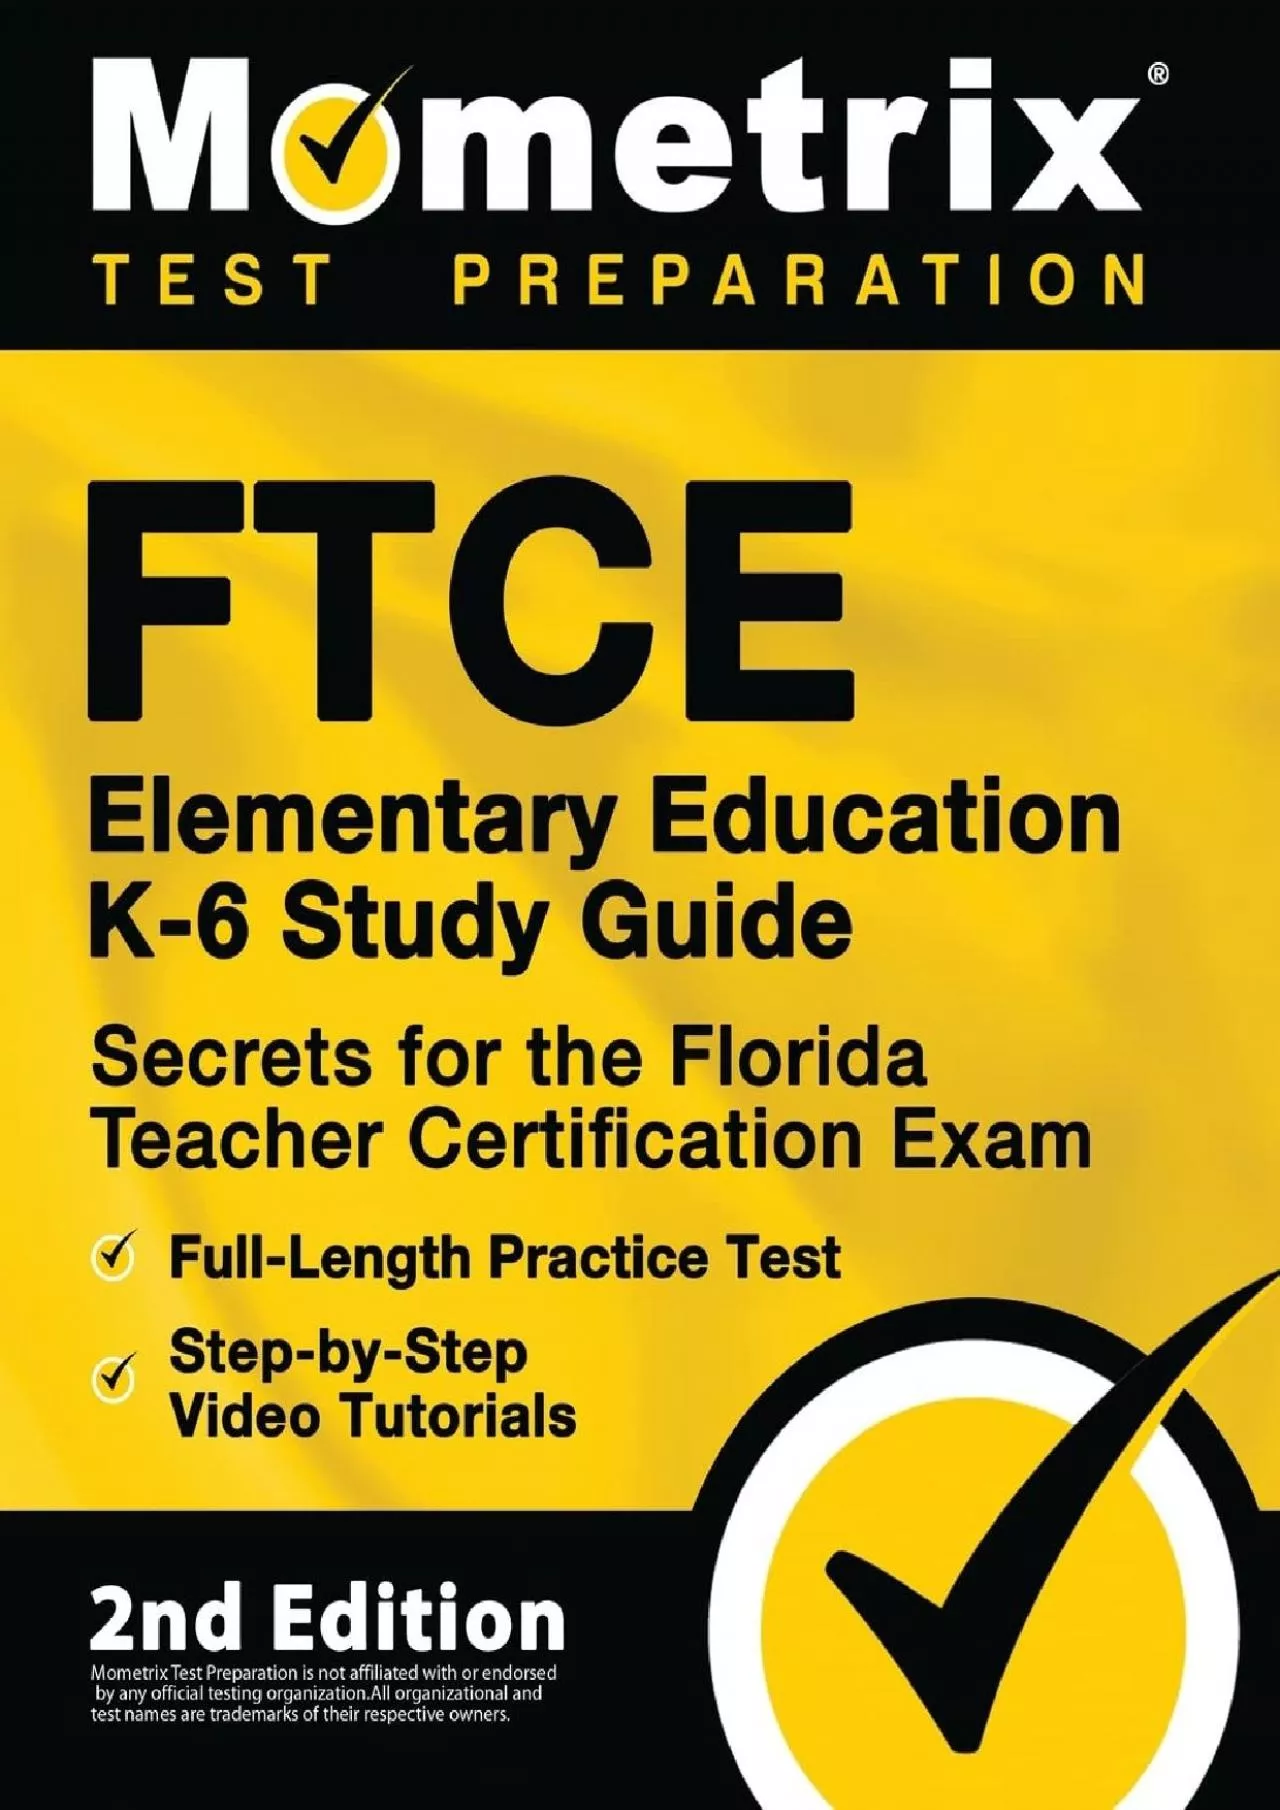 [READ] FTCE Elementary Education K-6 Study Guide Secrets for the Florida Teacher Certification